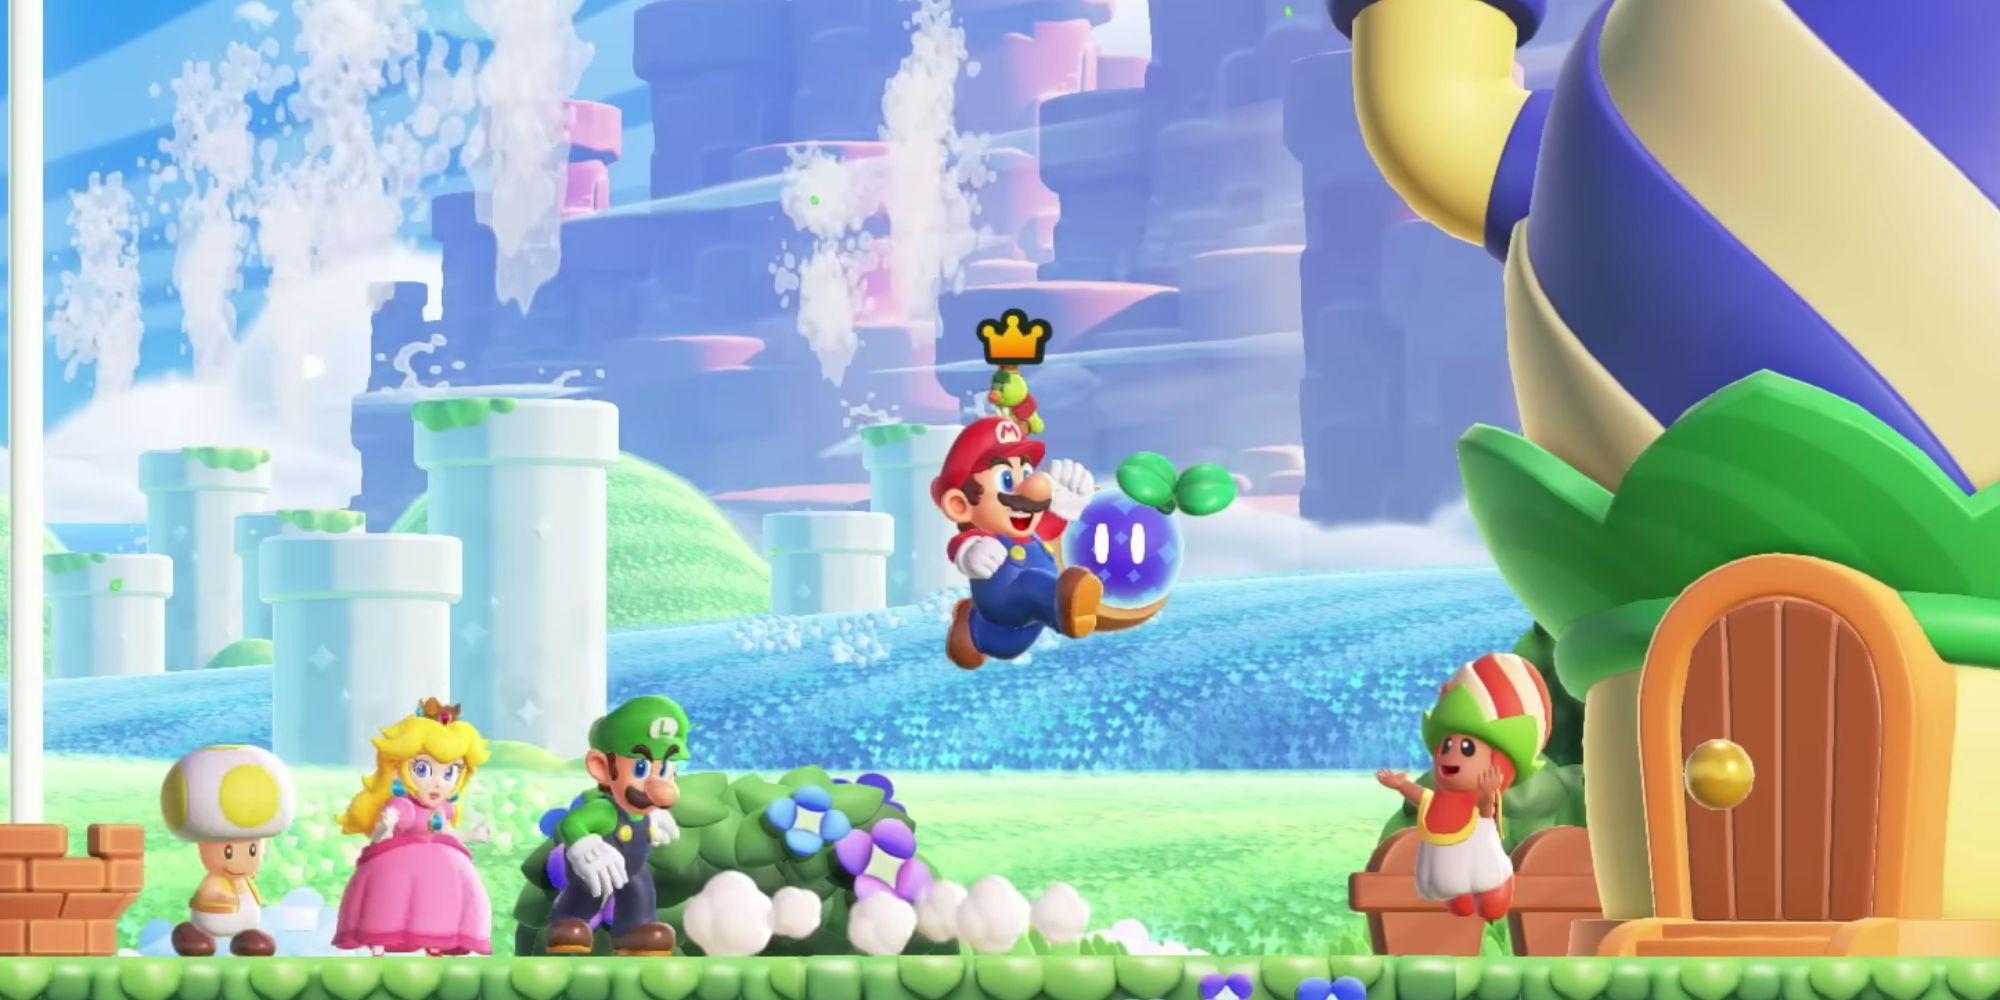 Luigi looking angry next to Peach and a yellow Toad in Super Mario Bros. Wonder.